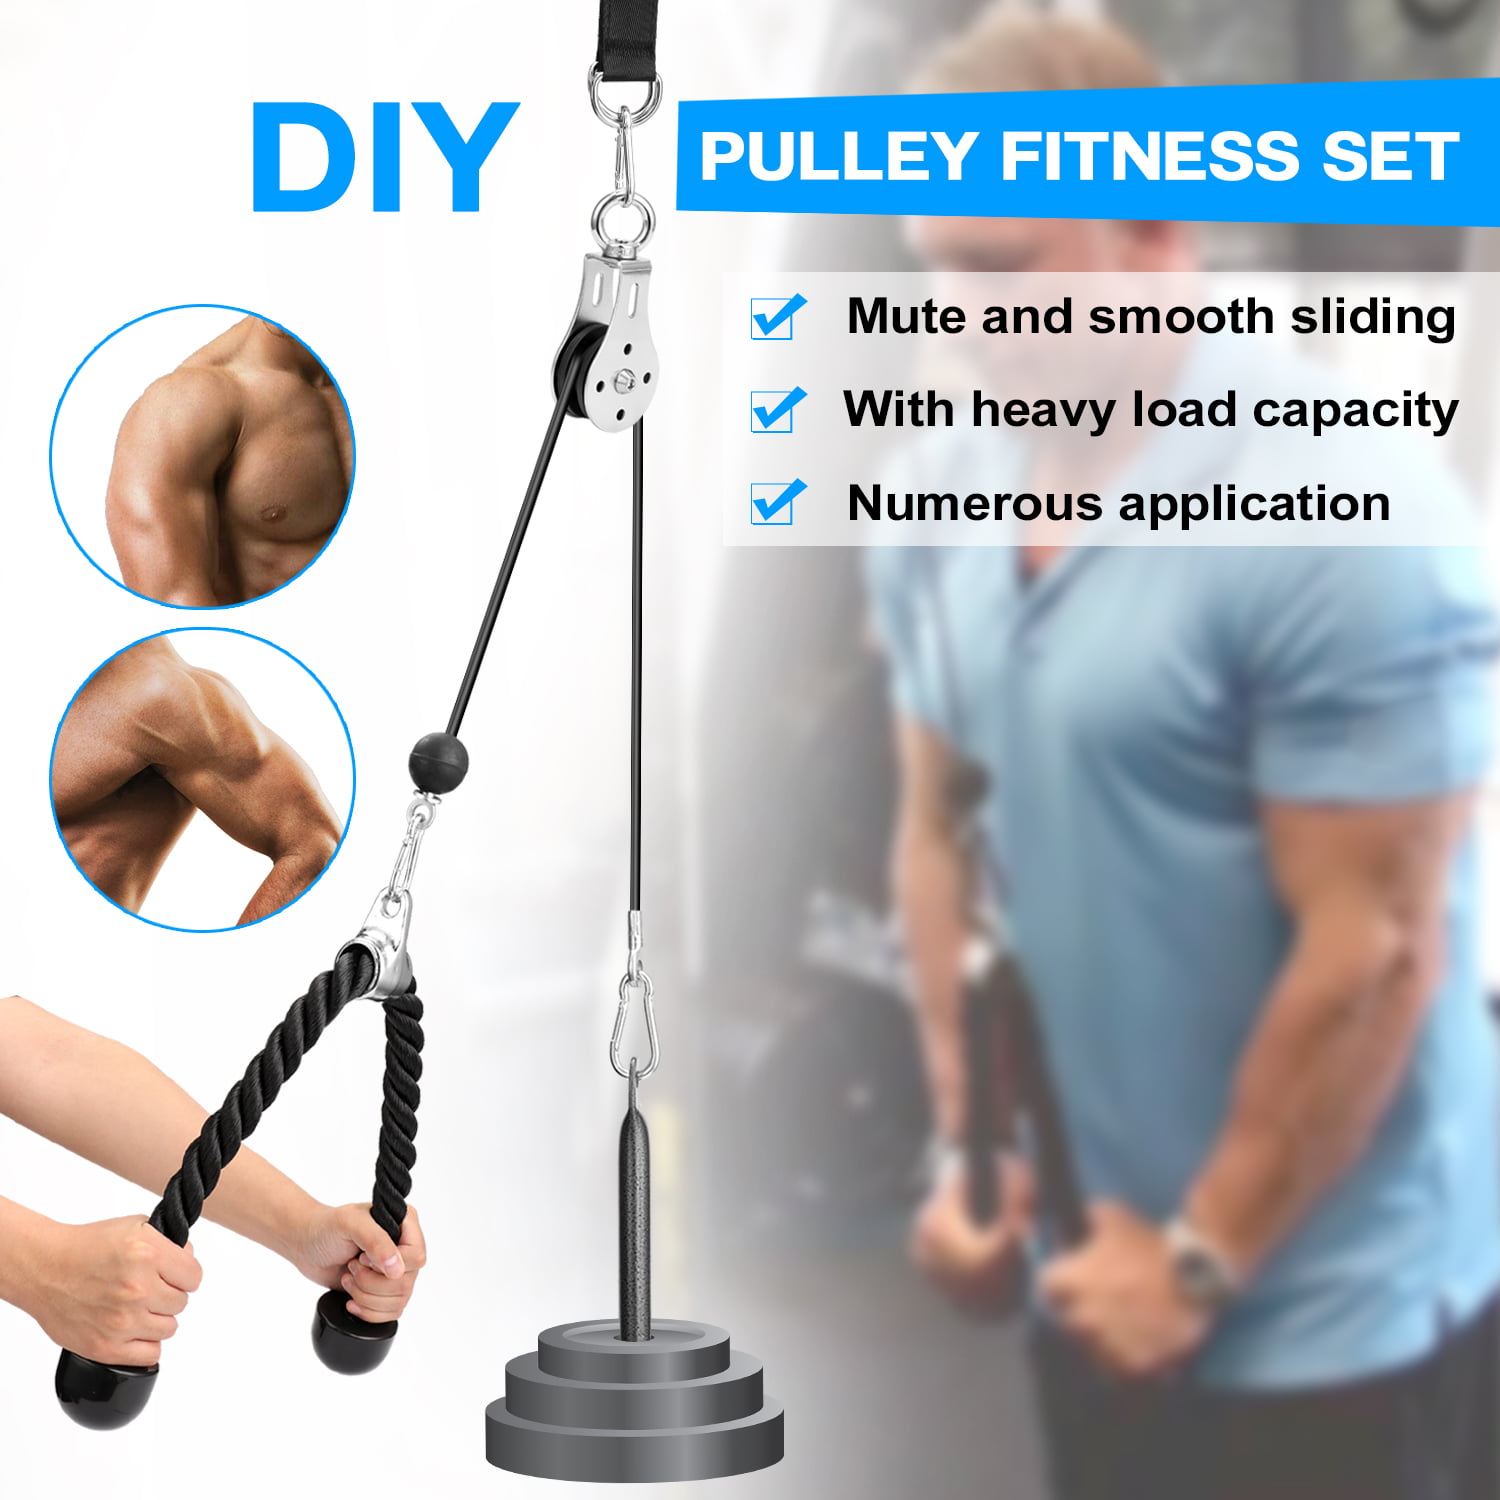 Cable Machine with Upgraded Loading Pin for Triceps Pull Down Back Shoulder-Home Gym Biceps Curl Forearm YUPING 11PC Lifting Forearm Arm Strength Fitness Equipment Fitness Lift Pulley System